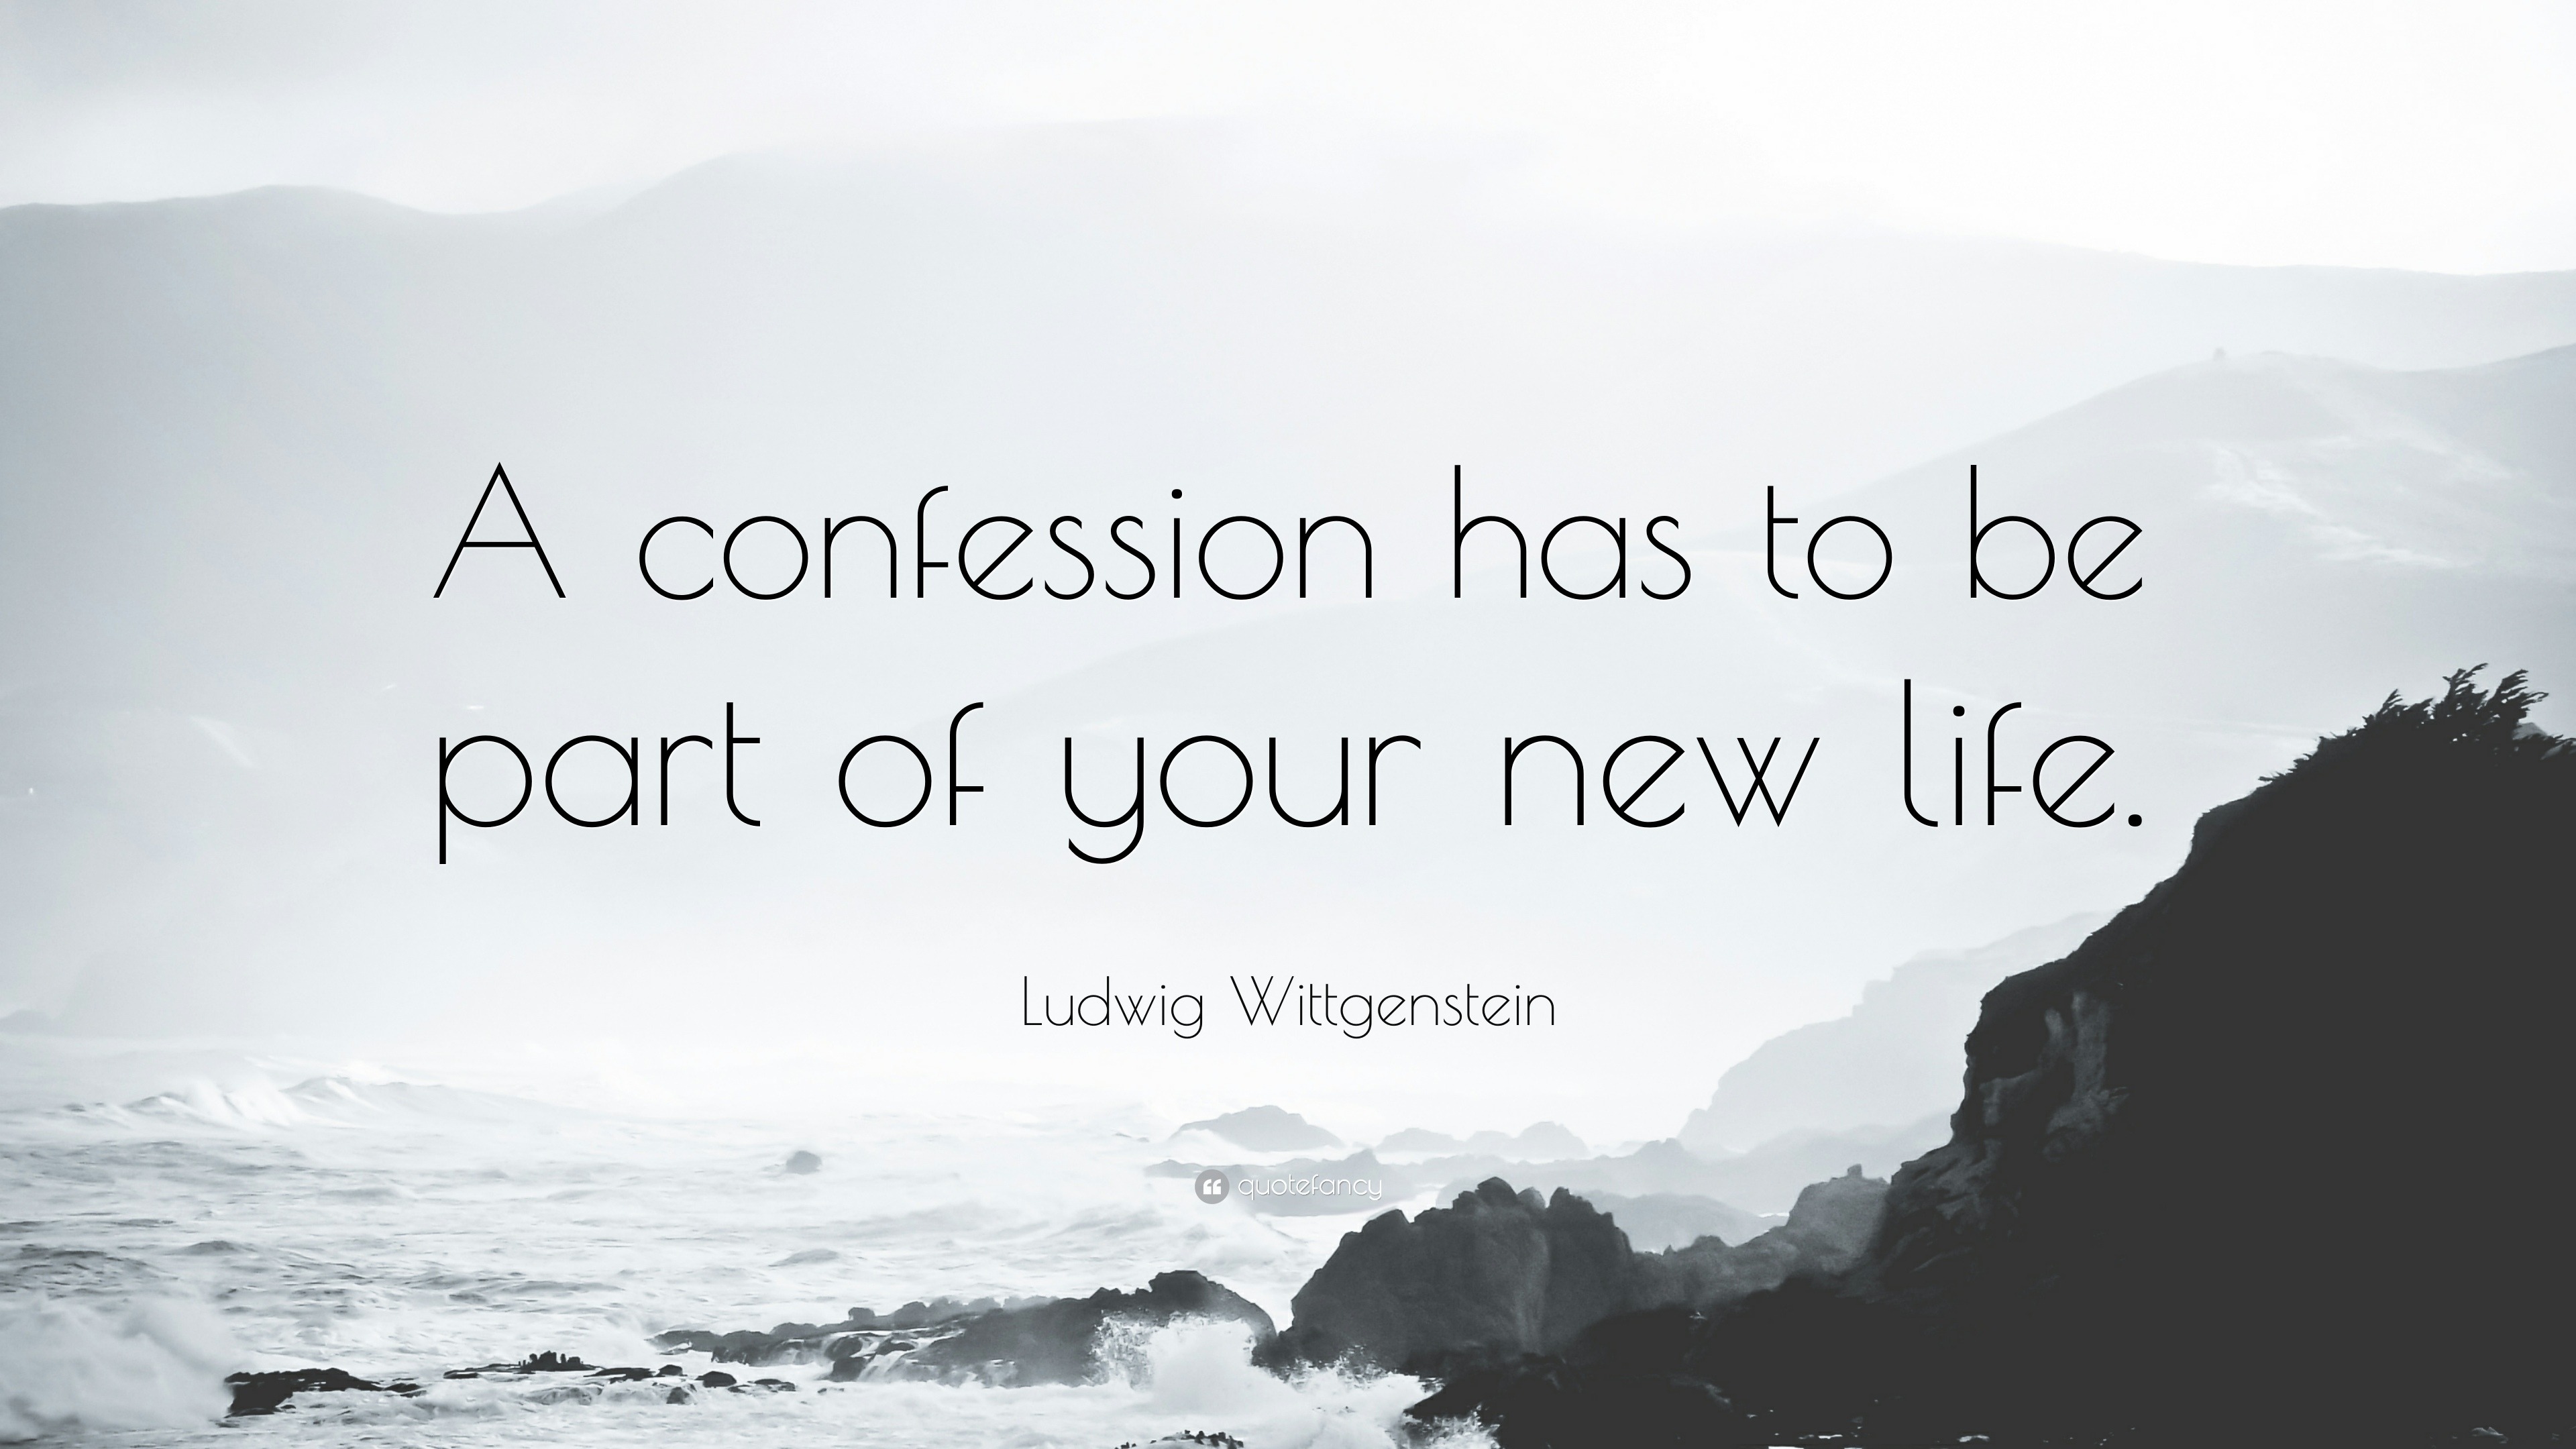 Ludwig Wittgenstein Quote “A confession has to be part of your new life